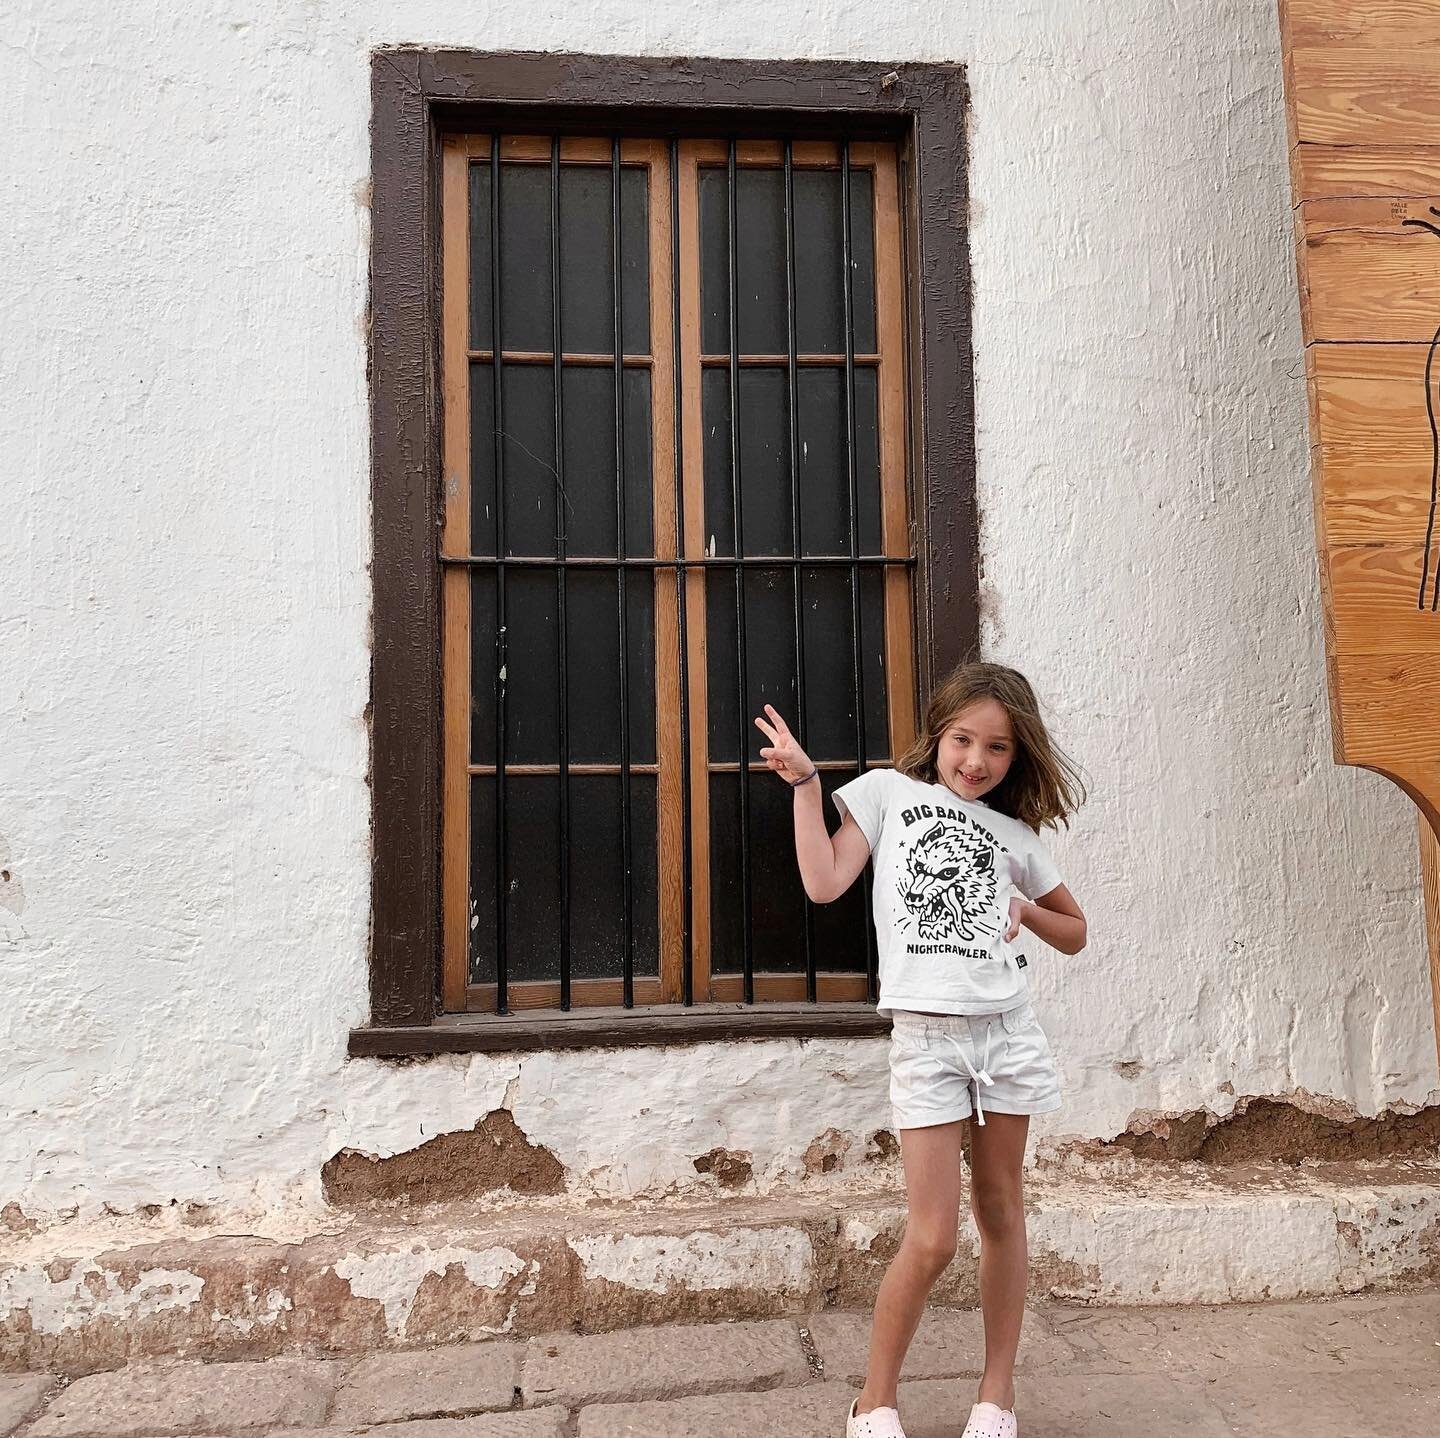 The always lovely Scarlett, looking great in Chile in her Big Bad Wolf tee. We love seeing Scarletts adventures with her family. 
#nightcrawlerco